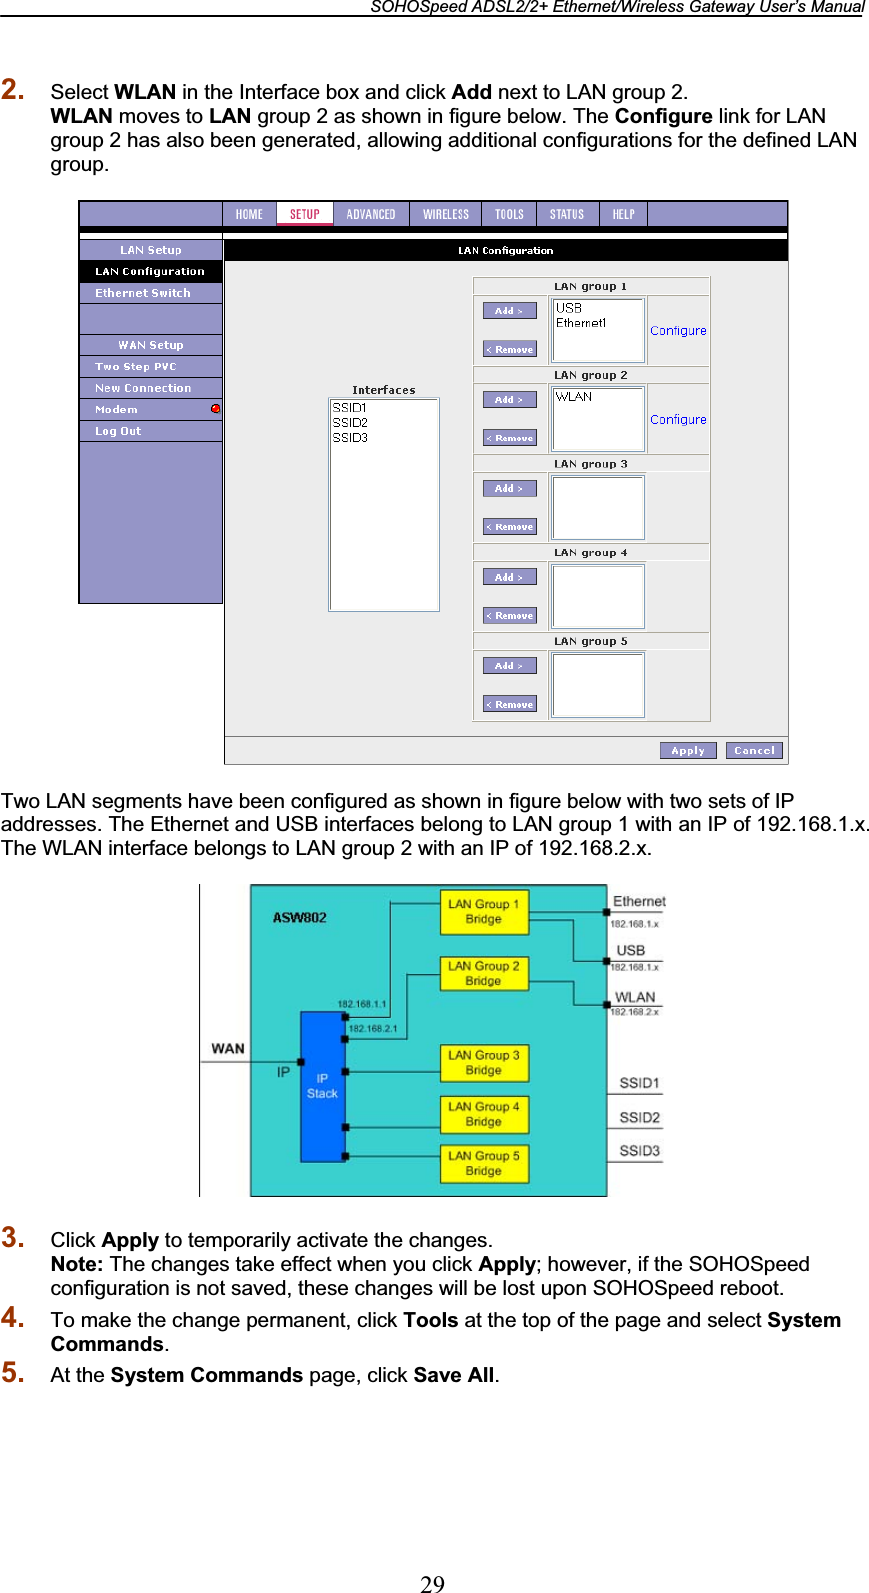 SOHOSpeed ADSL2/2+ Ethernet/Wireless Gateway User’s Manual 292. Select WLAN in the Interface box and click Add next to LAN group 2. WLAN moves to LAN group 2 as shown in figure below. The Configure link for LAN group 2 has also been generated, allowing additional configurations for the defined LAN group. Two LAN segments have been configured as shown in figure below with two sets of IP addresses. The Ethernet and USB interfaces belong to LAN group 1 with an IP of 192.168.1.x. The WLAN interface belongs to LAN group 2 with an IP of 192.168.2.x. 3. Click Apply to temporarily activate the changes. Note: The changes take effect when you click Apply; however, if the SOHOSpeed configuration is not saved, these changes will be lost upon SOHOSpeed reboot. 4. To make the change permanent, click Tools at the top of the page and select System Commands.5. At the System Commands page, click Save All.